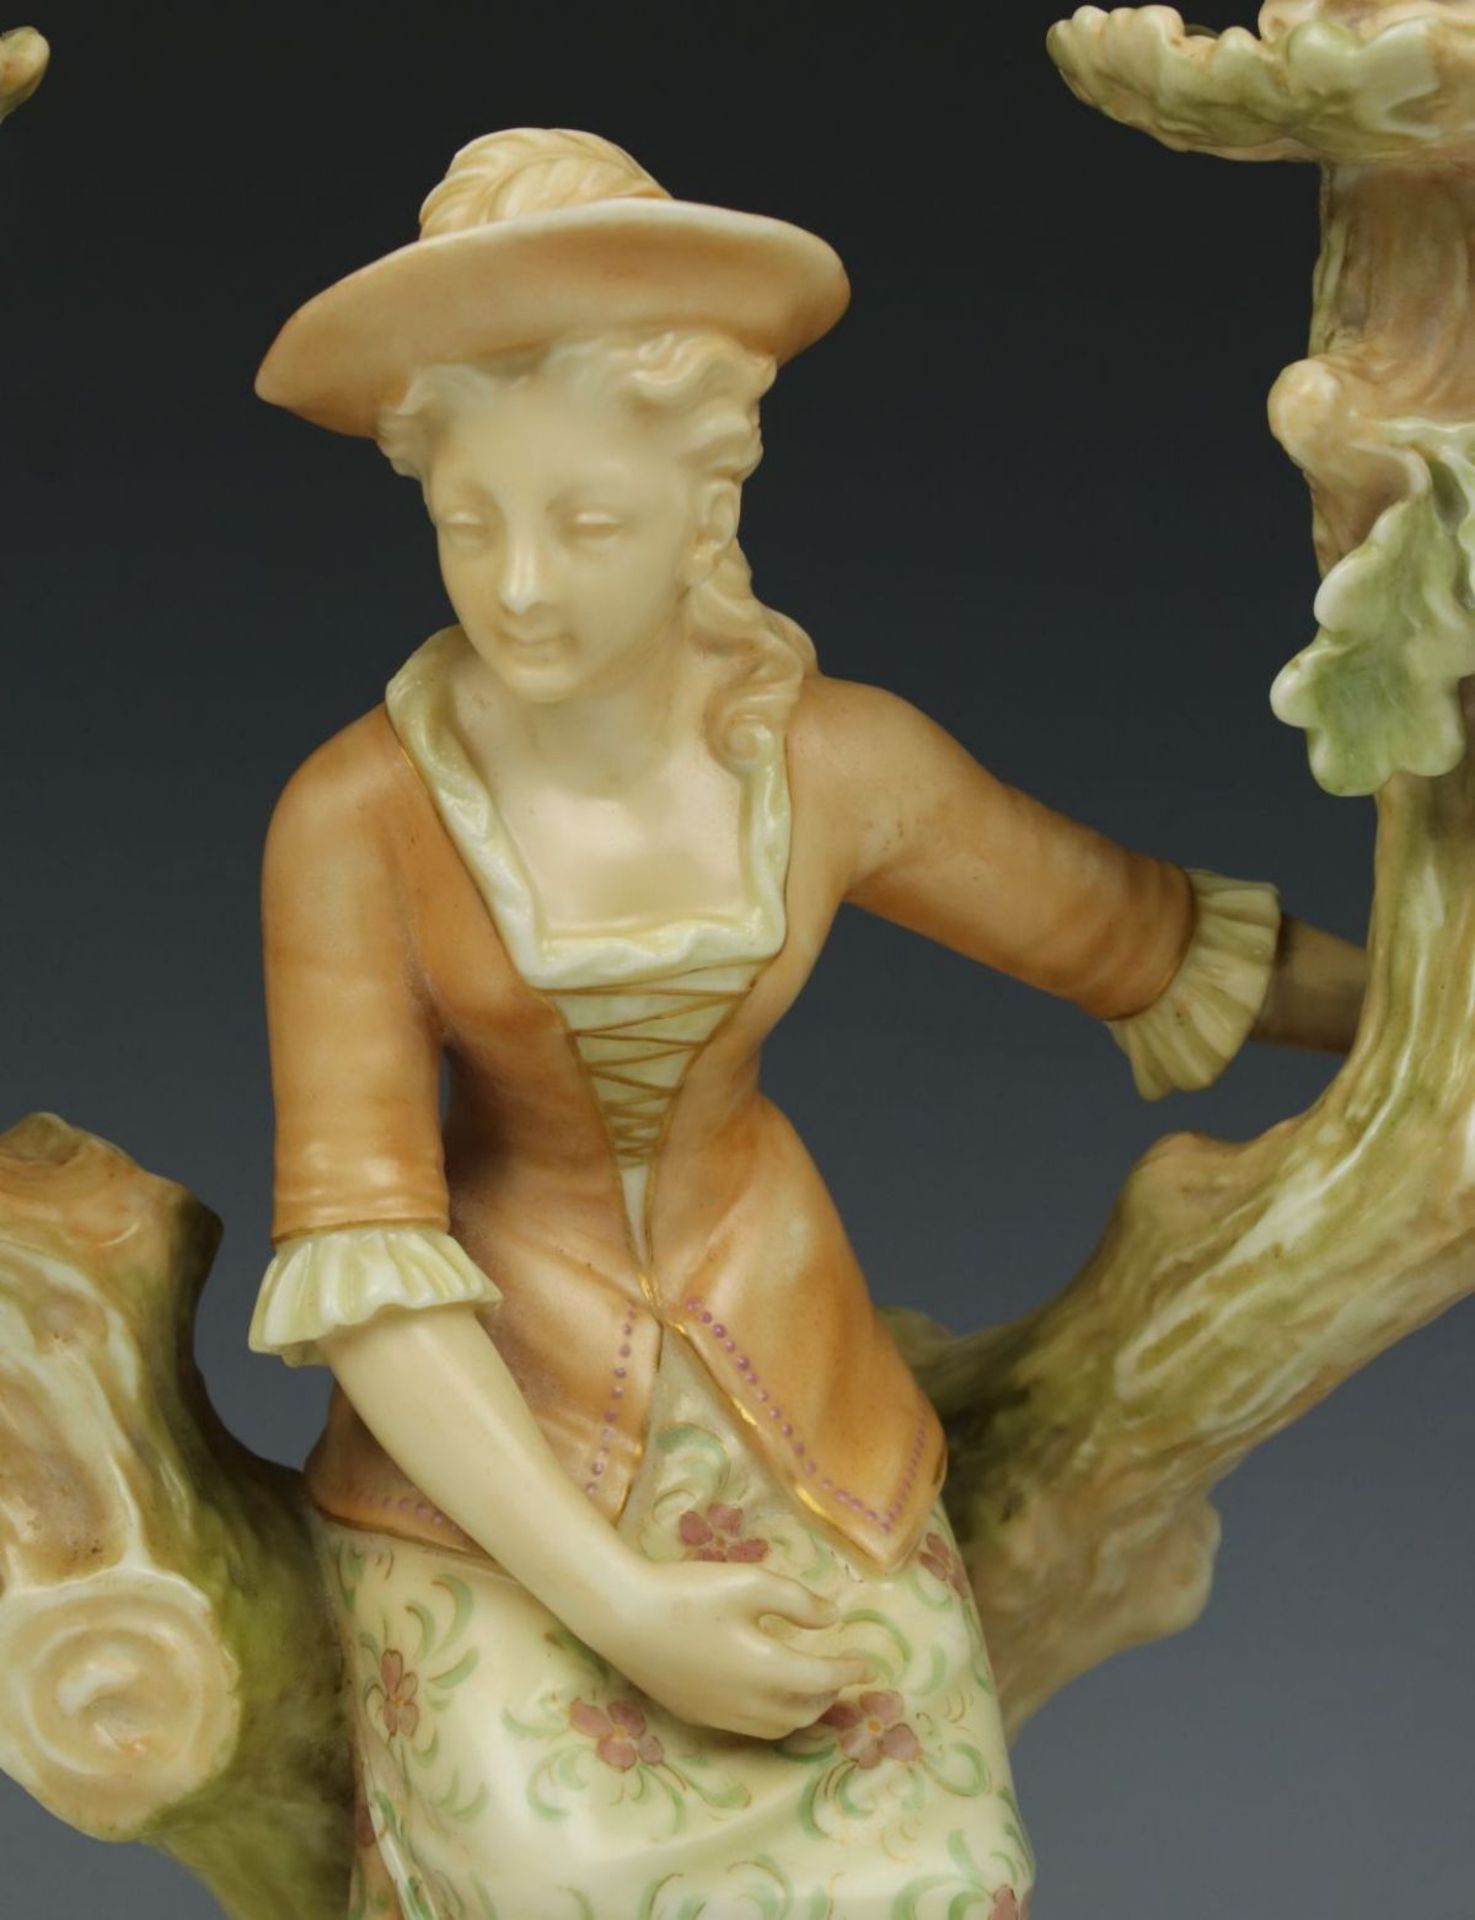 19C Royal Worcester figurine "Candle Holder with Sitting Woman" - Image 6 of 10